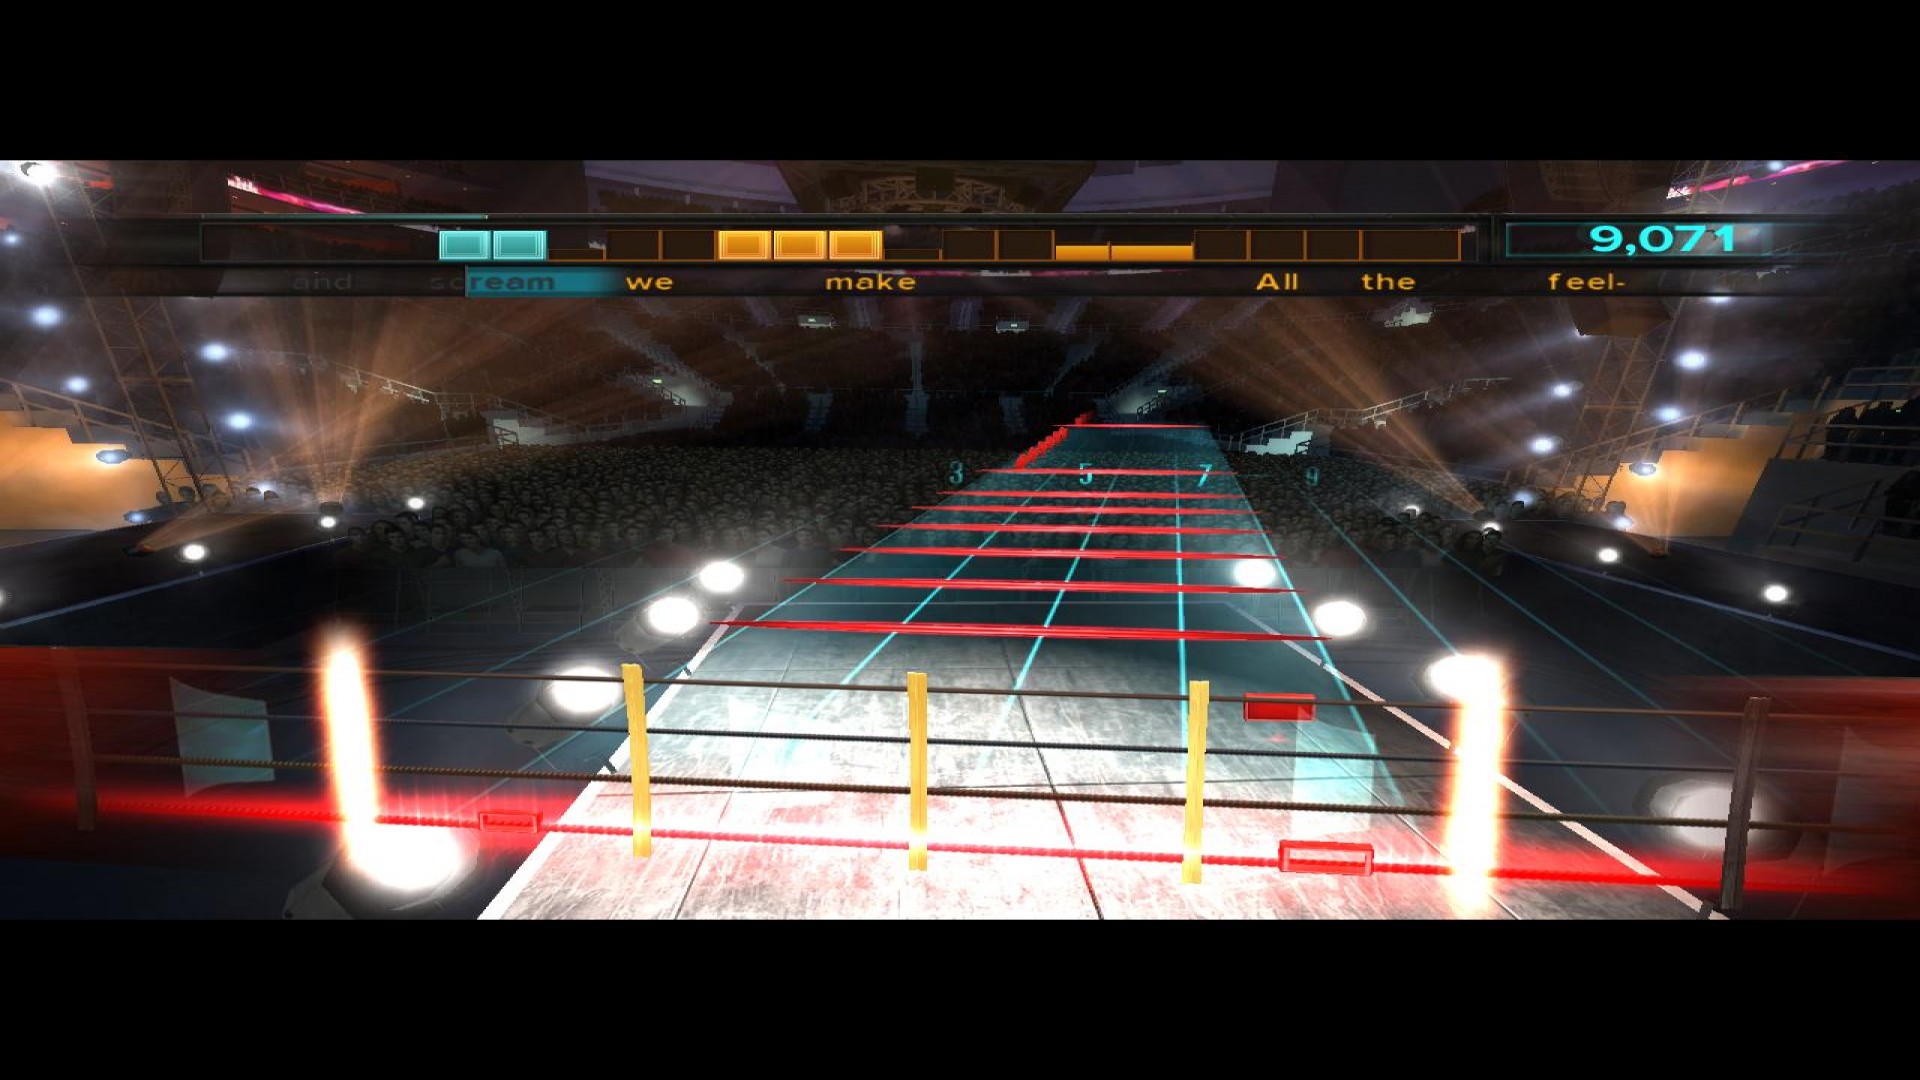 Rocksmith - Three Days Grace - I Hate Everything About You screenshot